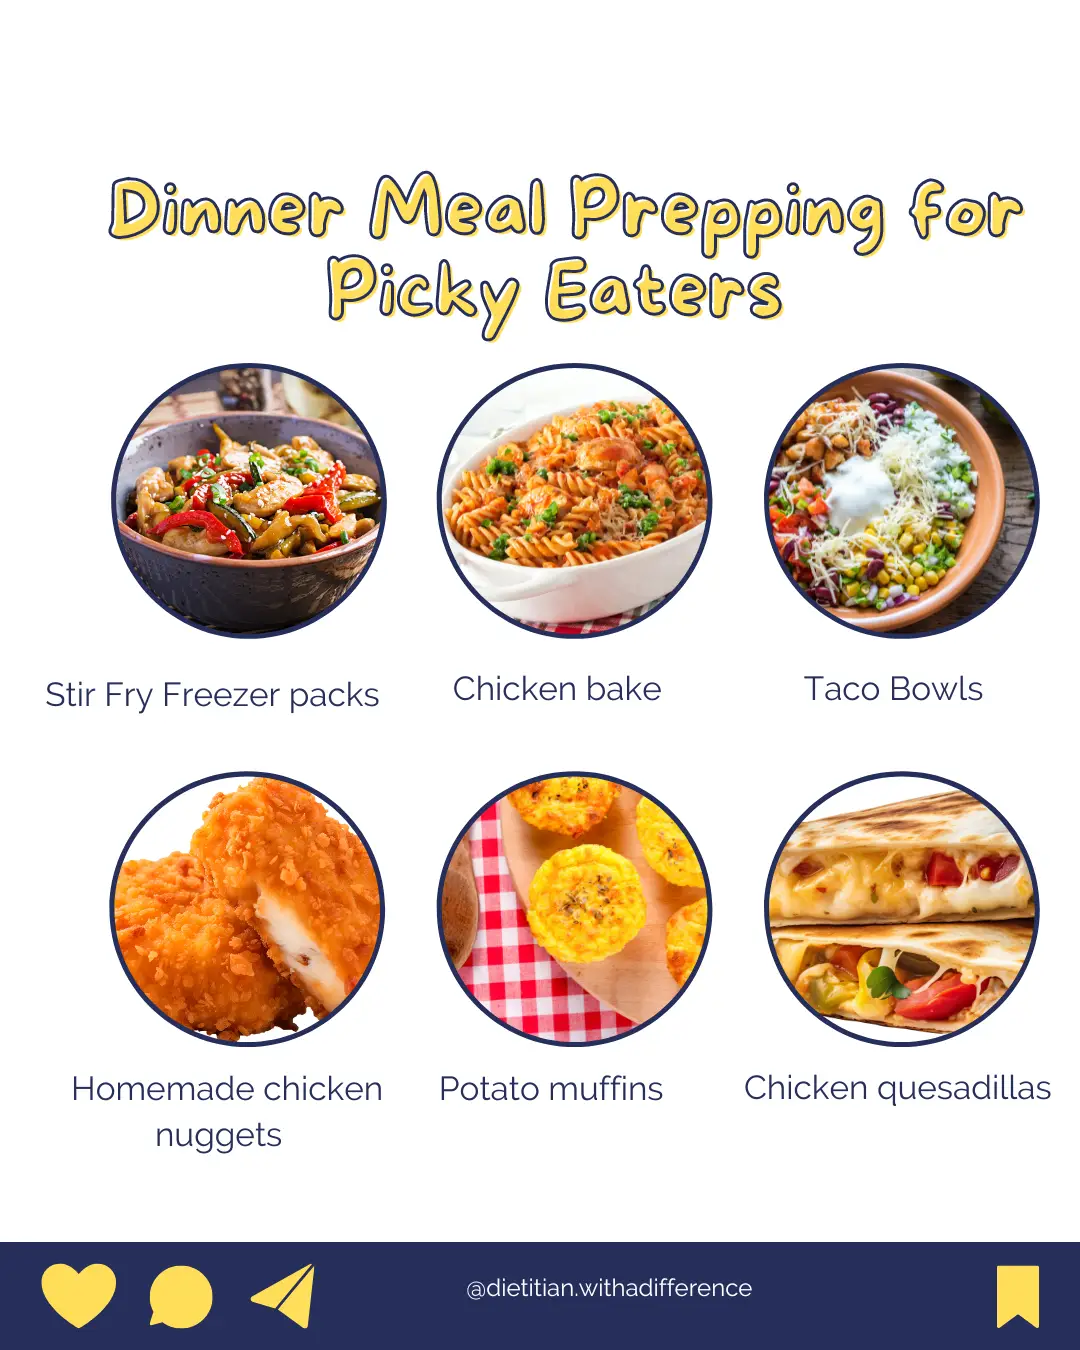 Dinner ideas - Meal prepping for picky eaters 